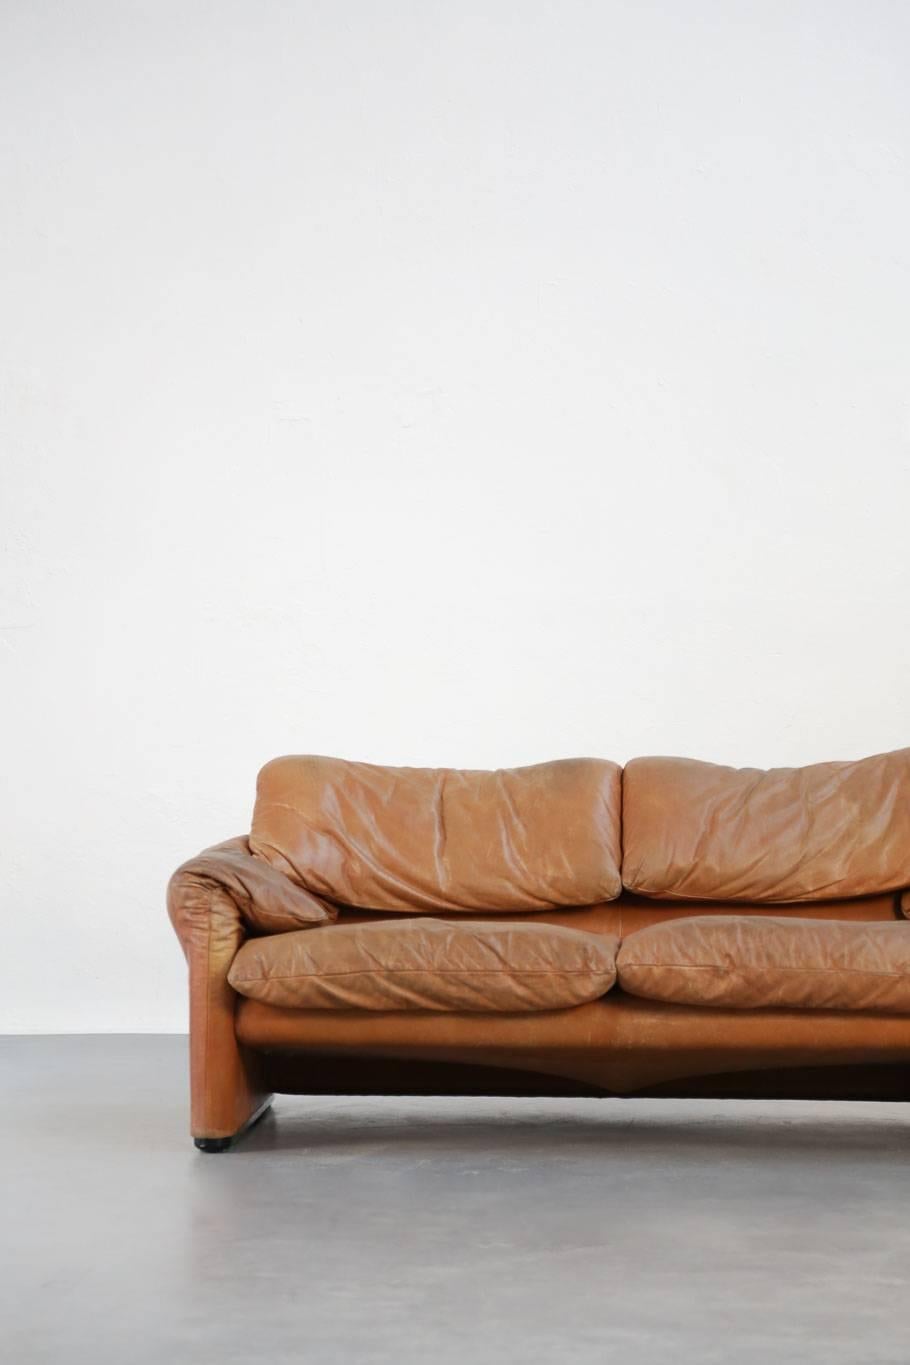 Italian design for this sofa designed by Vice Magistretti and made by Cassina.
Sofa made of Havana leather in 1970s.
 